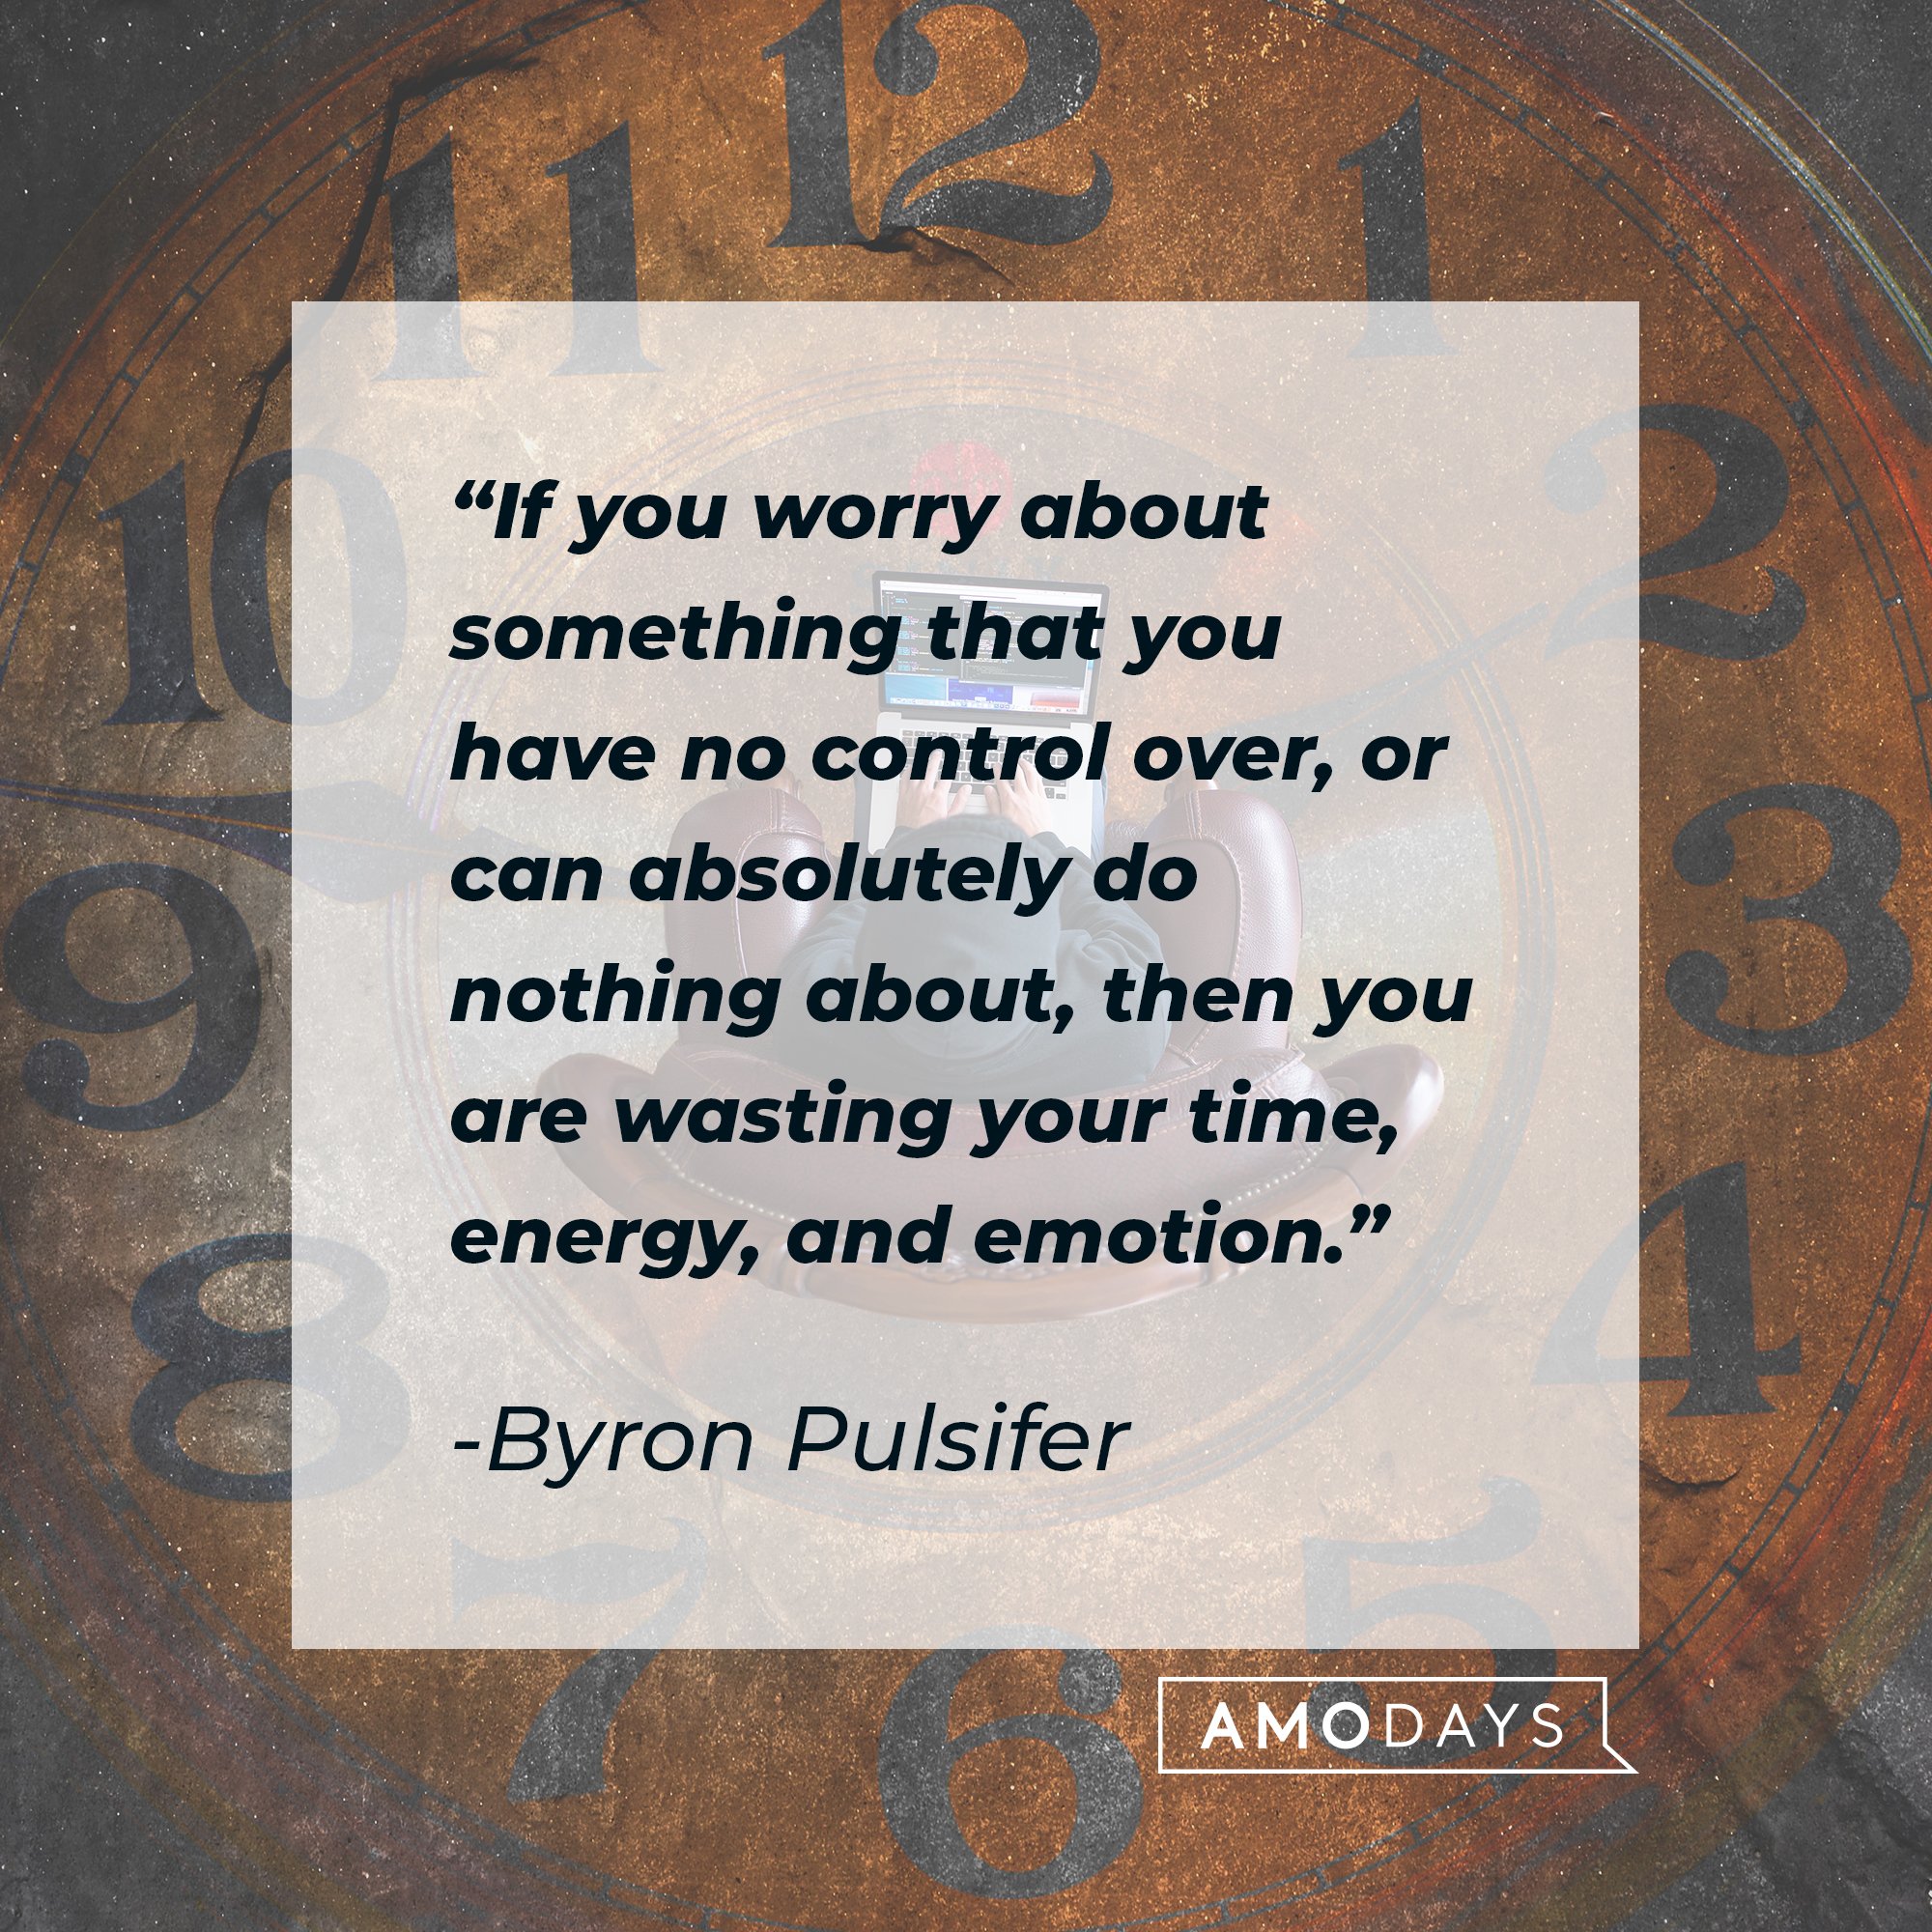  Byron Pulsifer’s quote: "If you worry about something that you have no control over, or can absolutely do nothing about, then you are wasting your time, energy, and emotion." | Image: AmoDays   